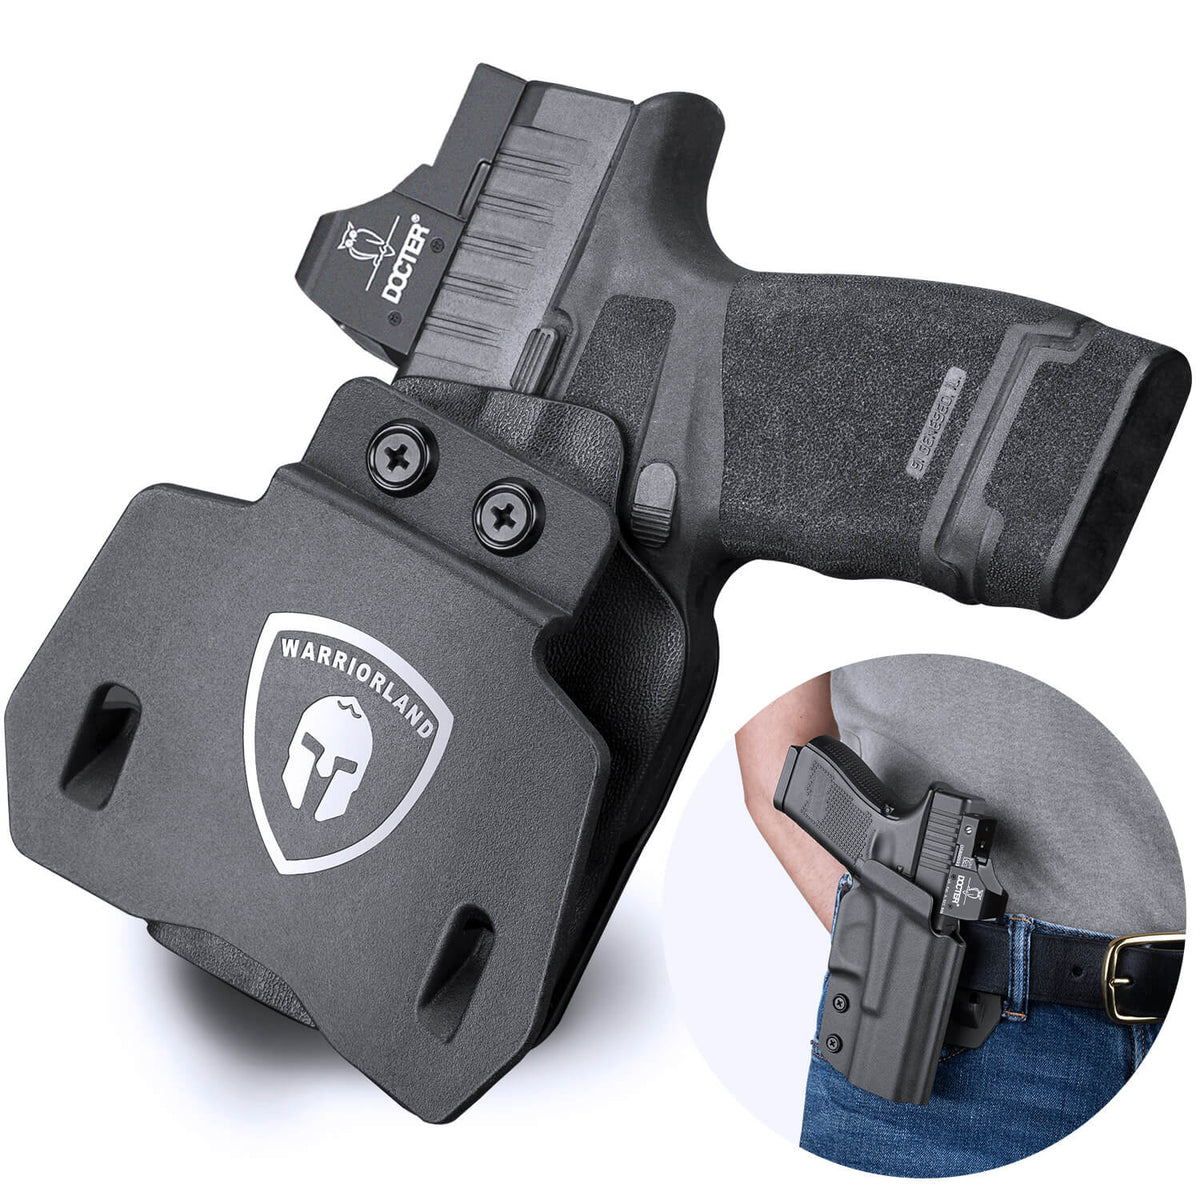 Kydex OWB Paddle Holster for Springfield Armory Hellcat Pro with red dot sights optics cut Trigger Guard Appendix Open Carry | WARRIORLAND